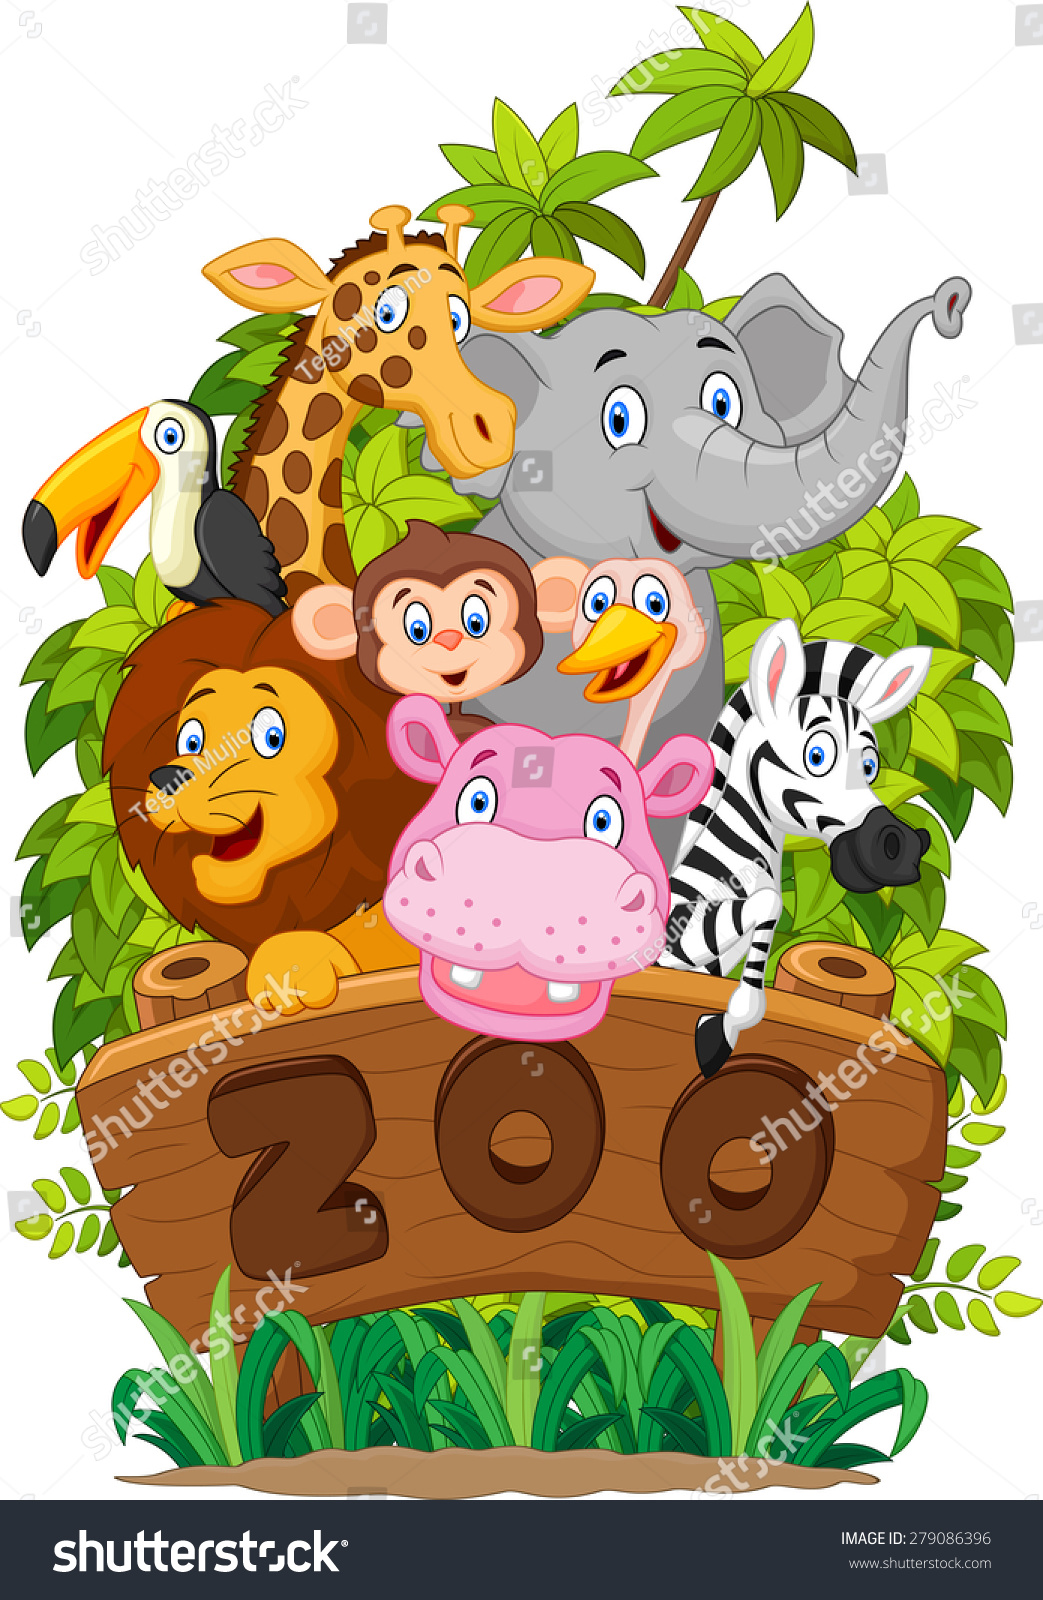 zoo background clipart - photo #39